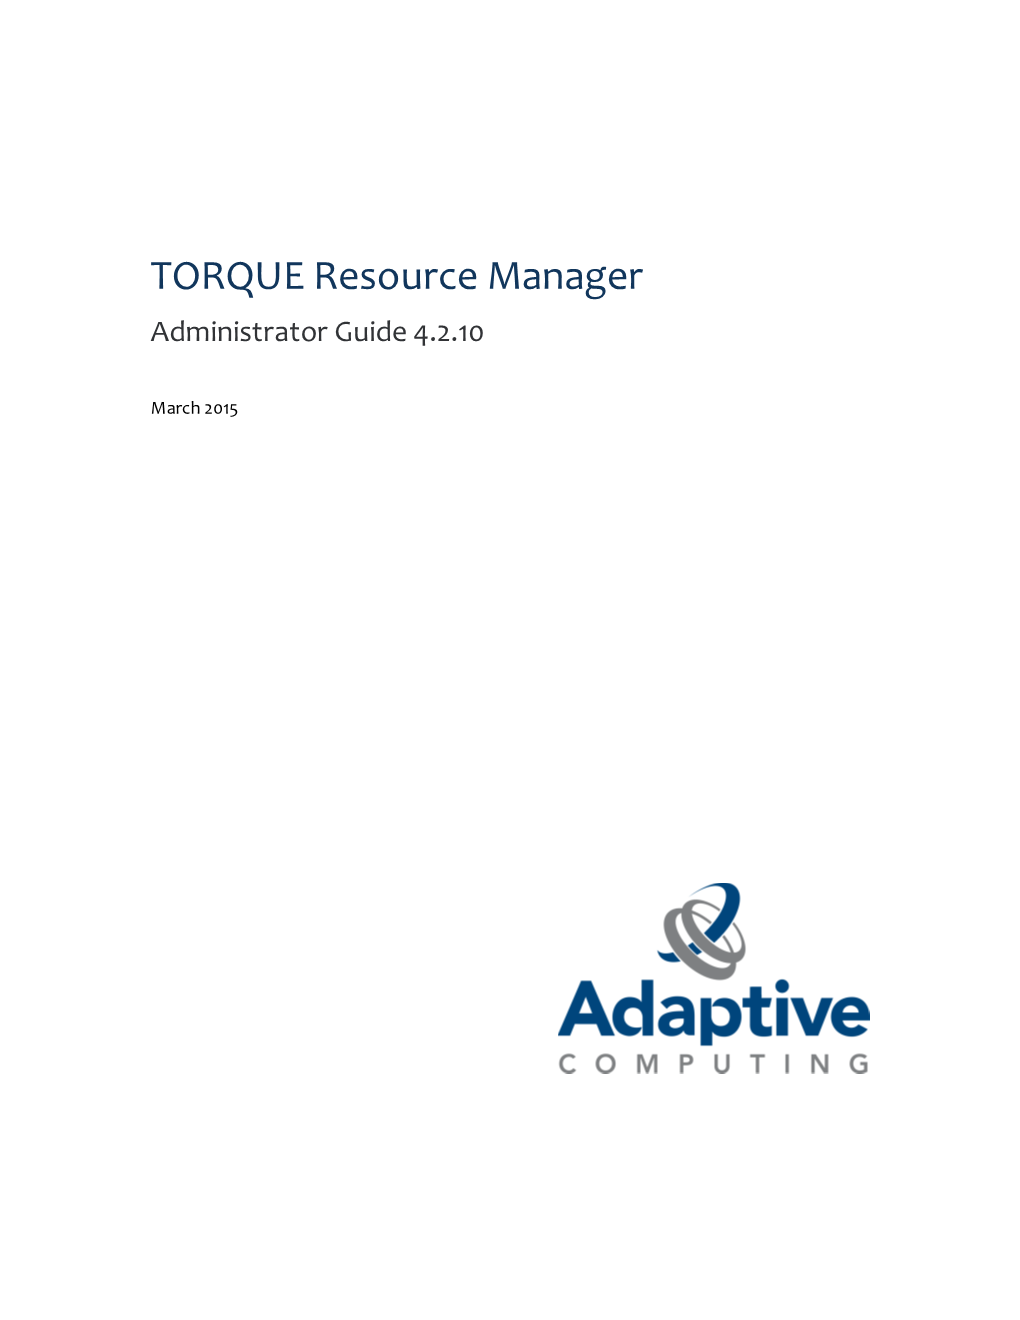 TORQUE Resource Manager Administrator Guide 4.2.10